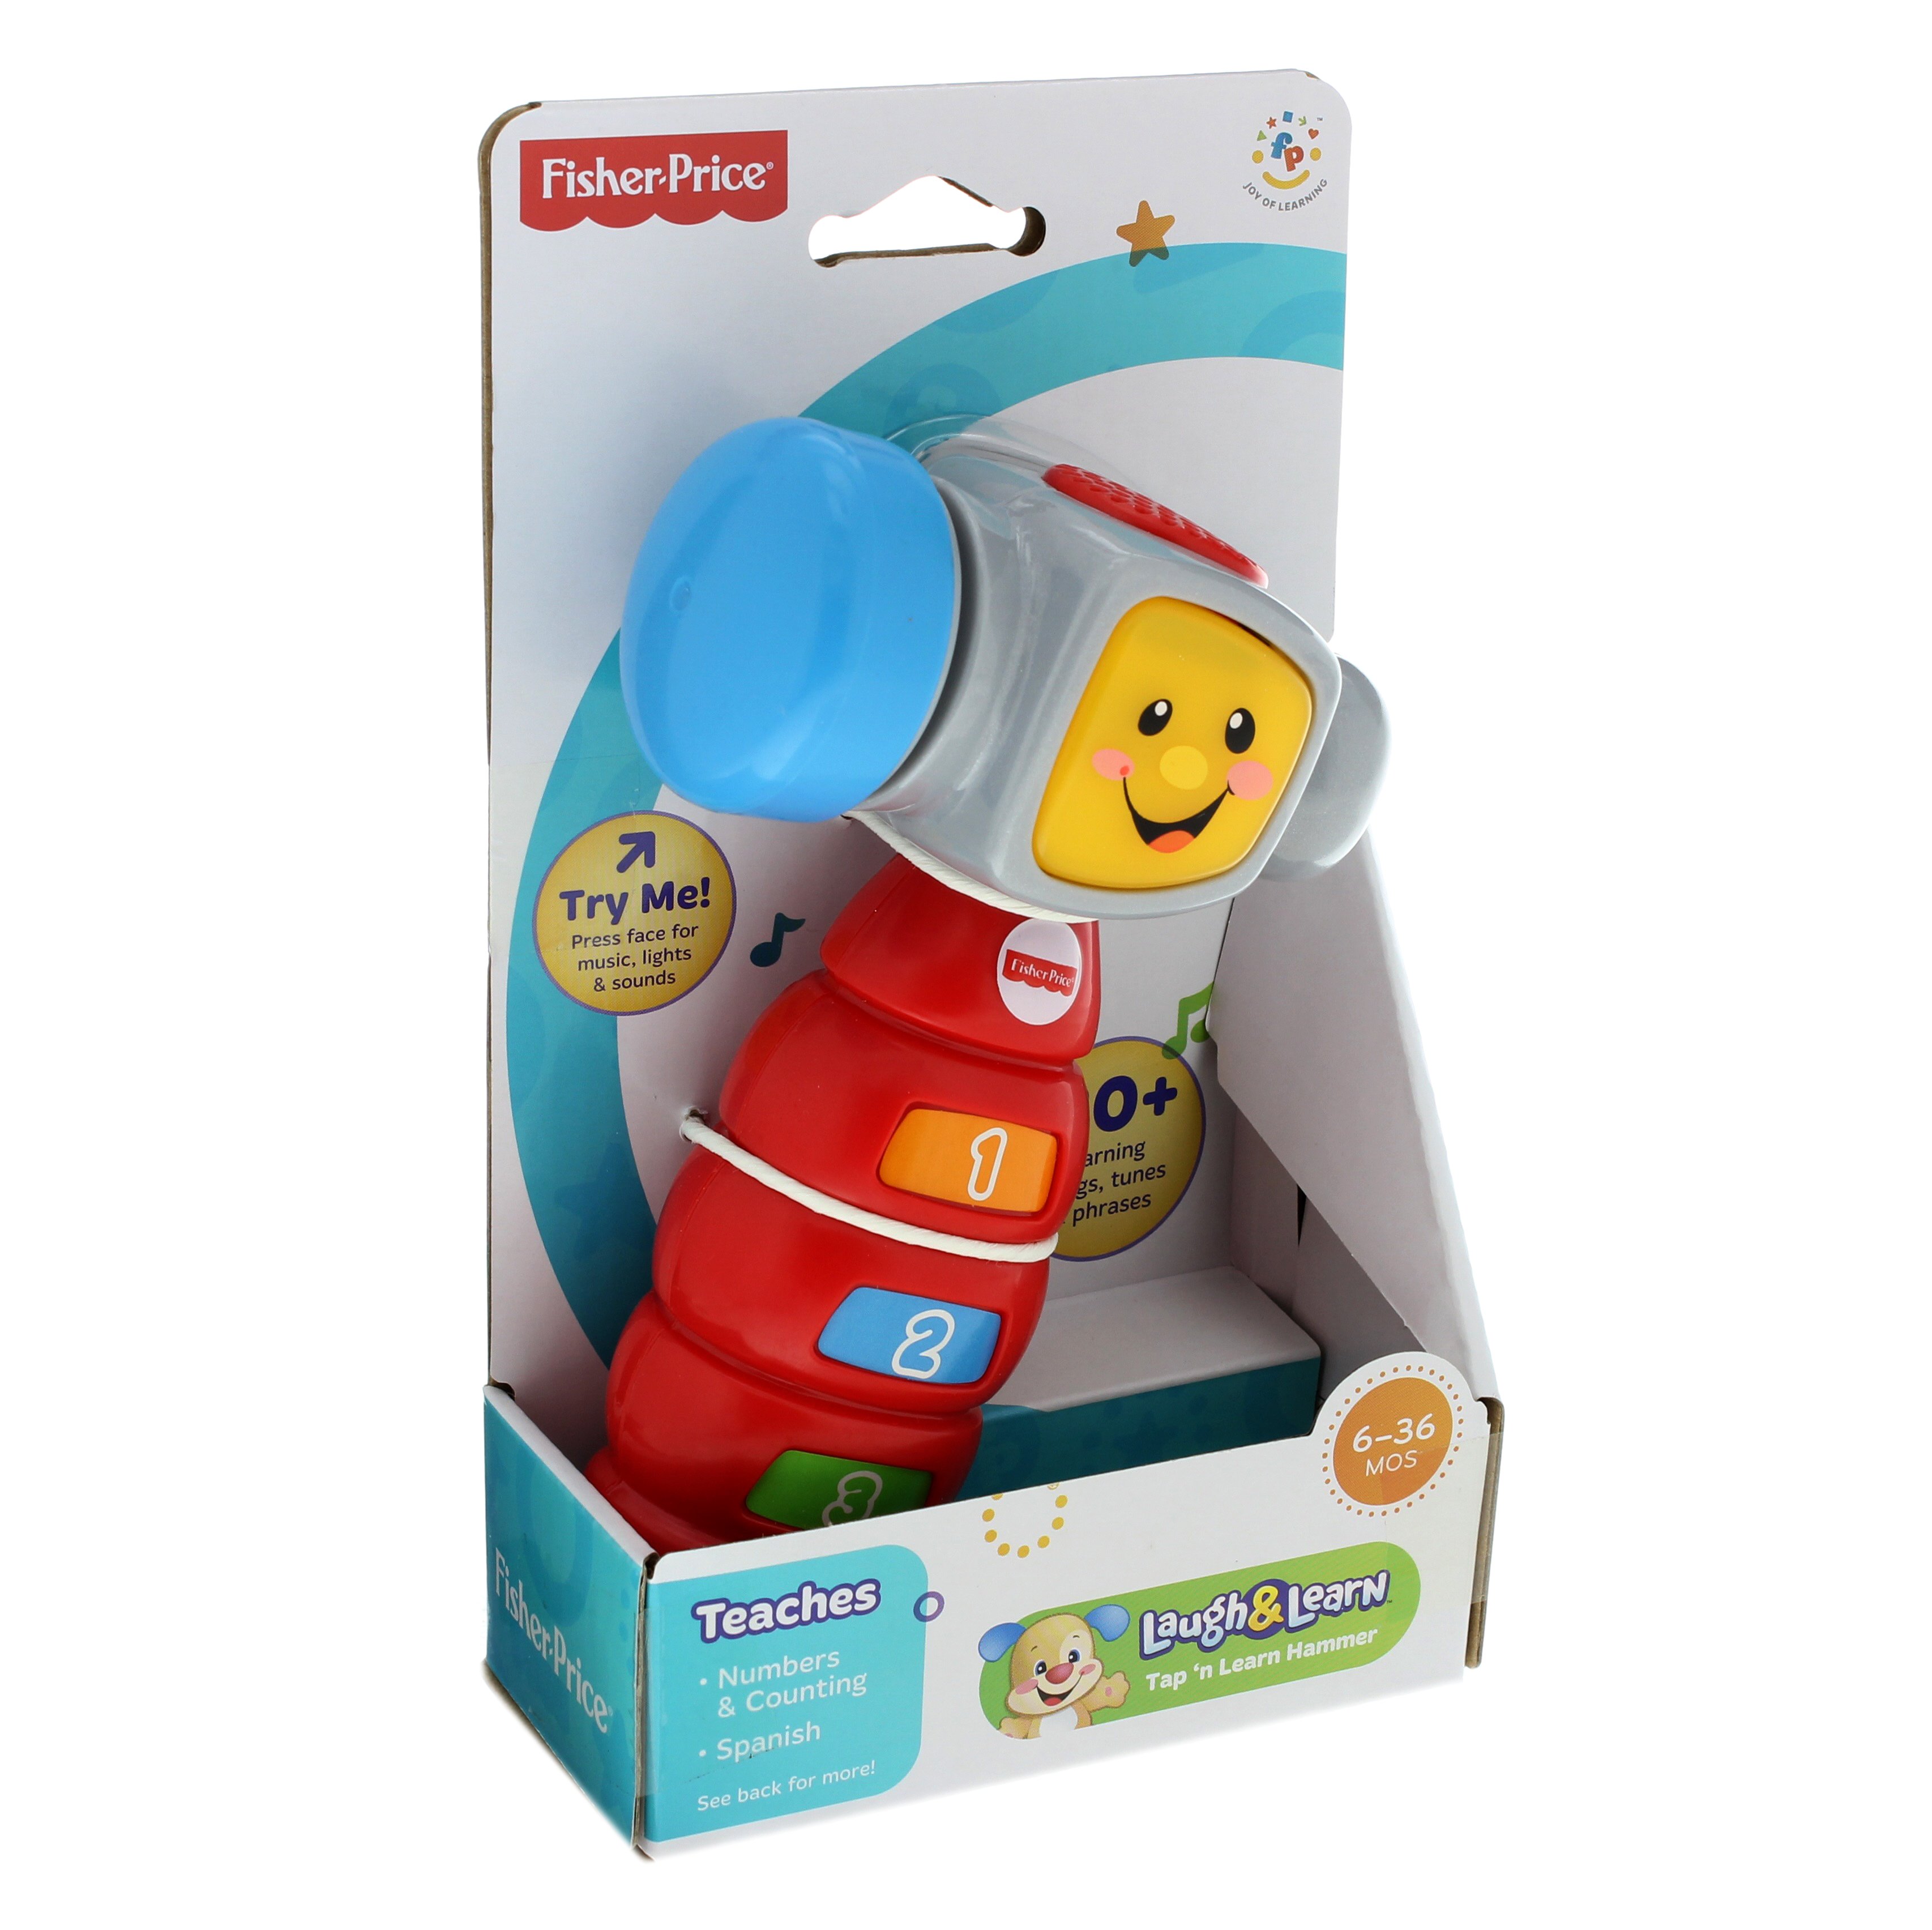 Fisher-Price Laugh & Learn Game Controller - Shop Baby Toys at H-E-B